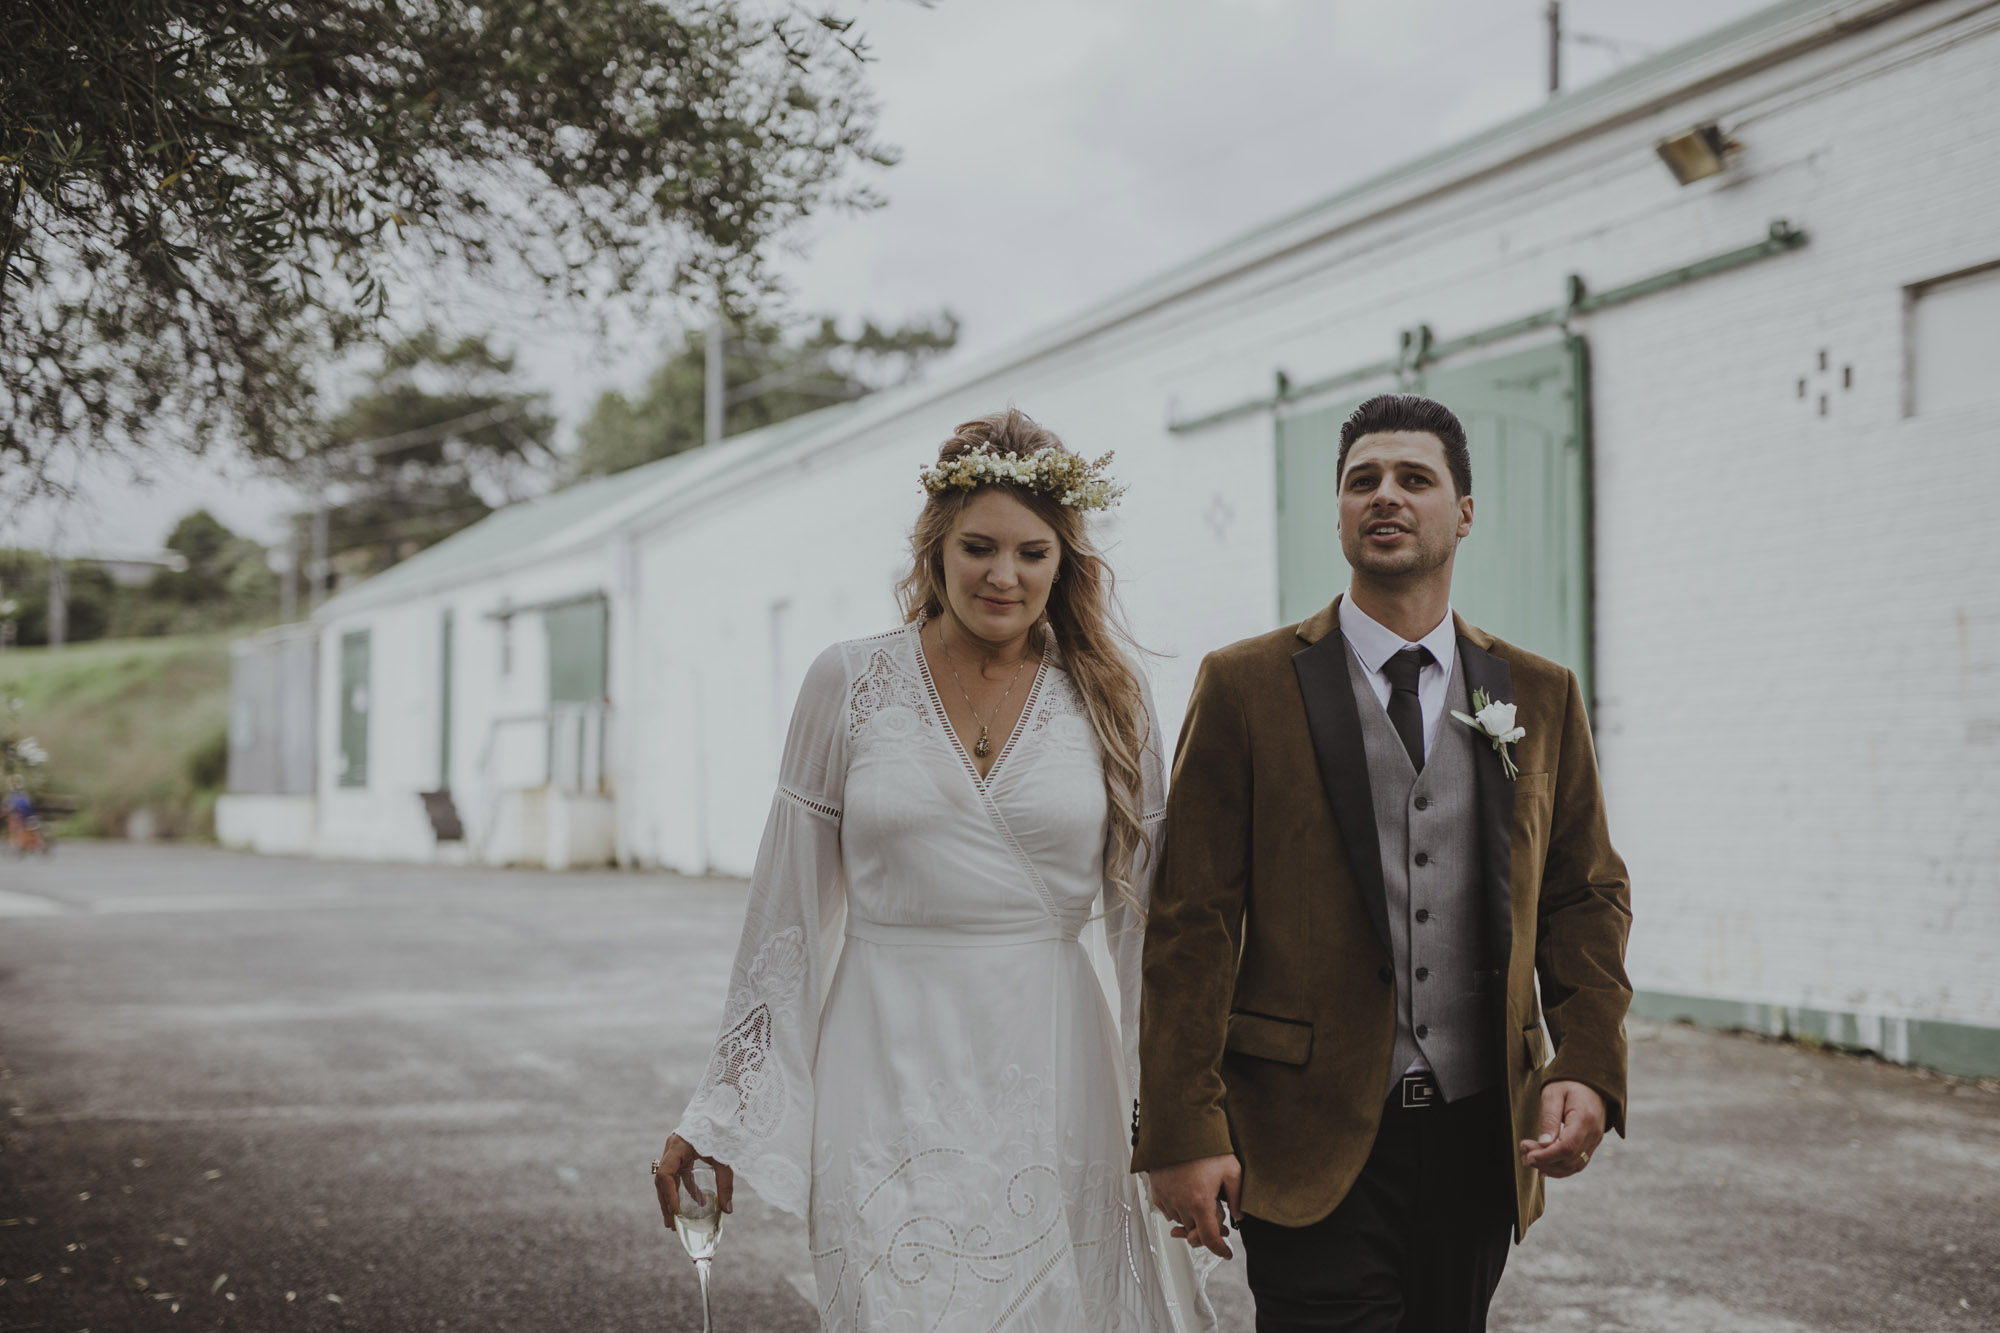 43 A low key New Zealand Estate wedding with a bohemian vintage vibe